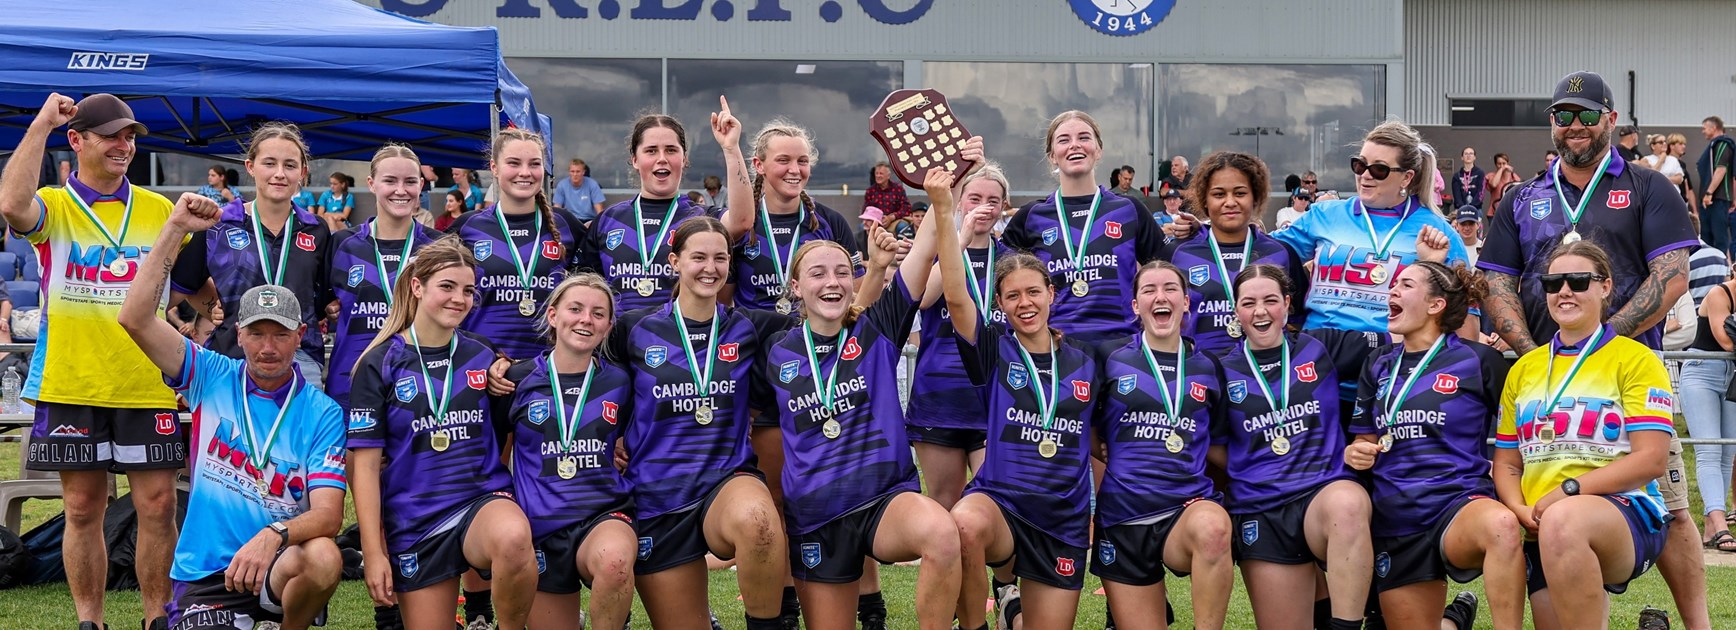 Lachlan District crowned Premiers in inaugural season